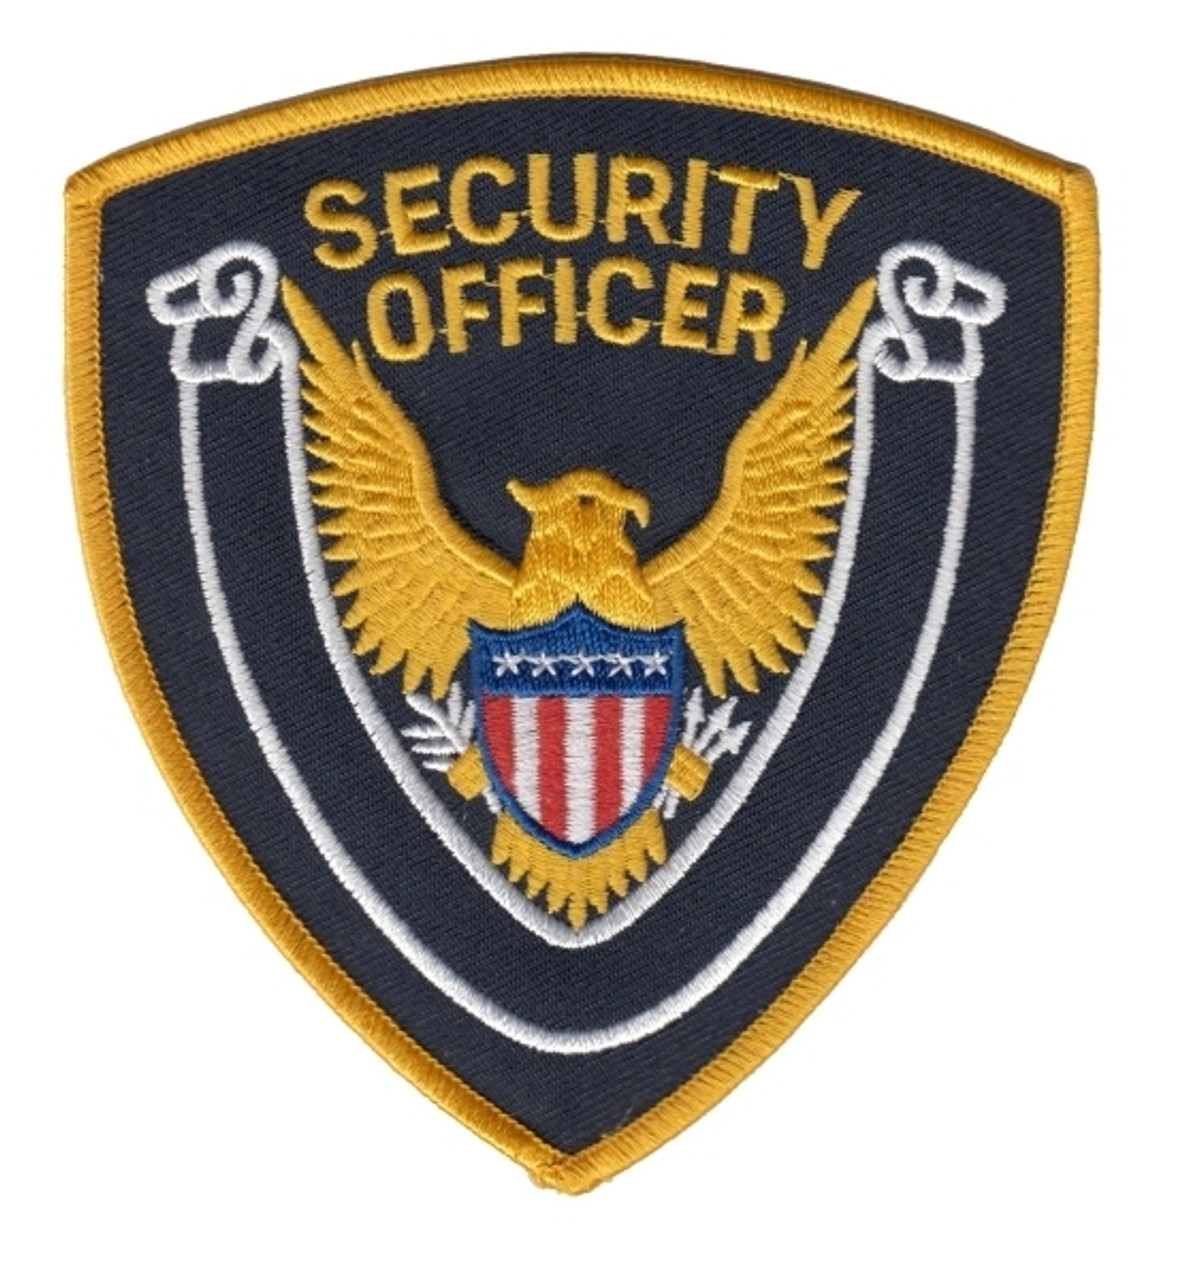 PRIVATE SECURITY OFFICER Shoulder Patch, Gold Border, 3-3/4x4-1/2